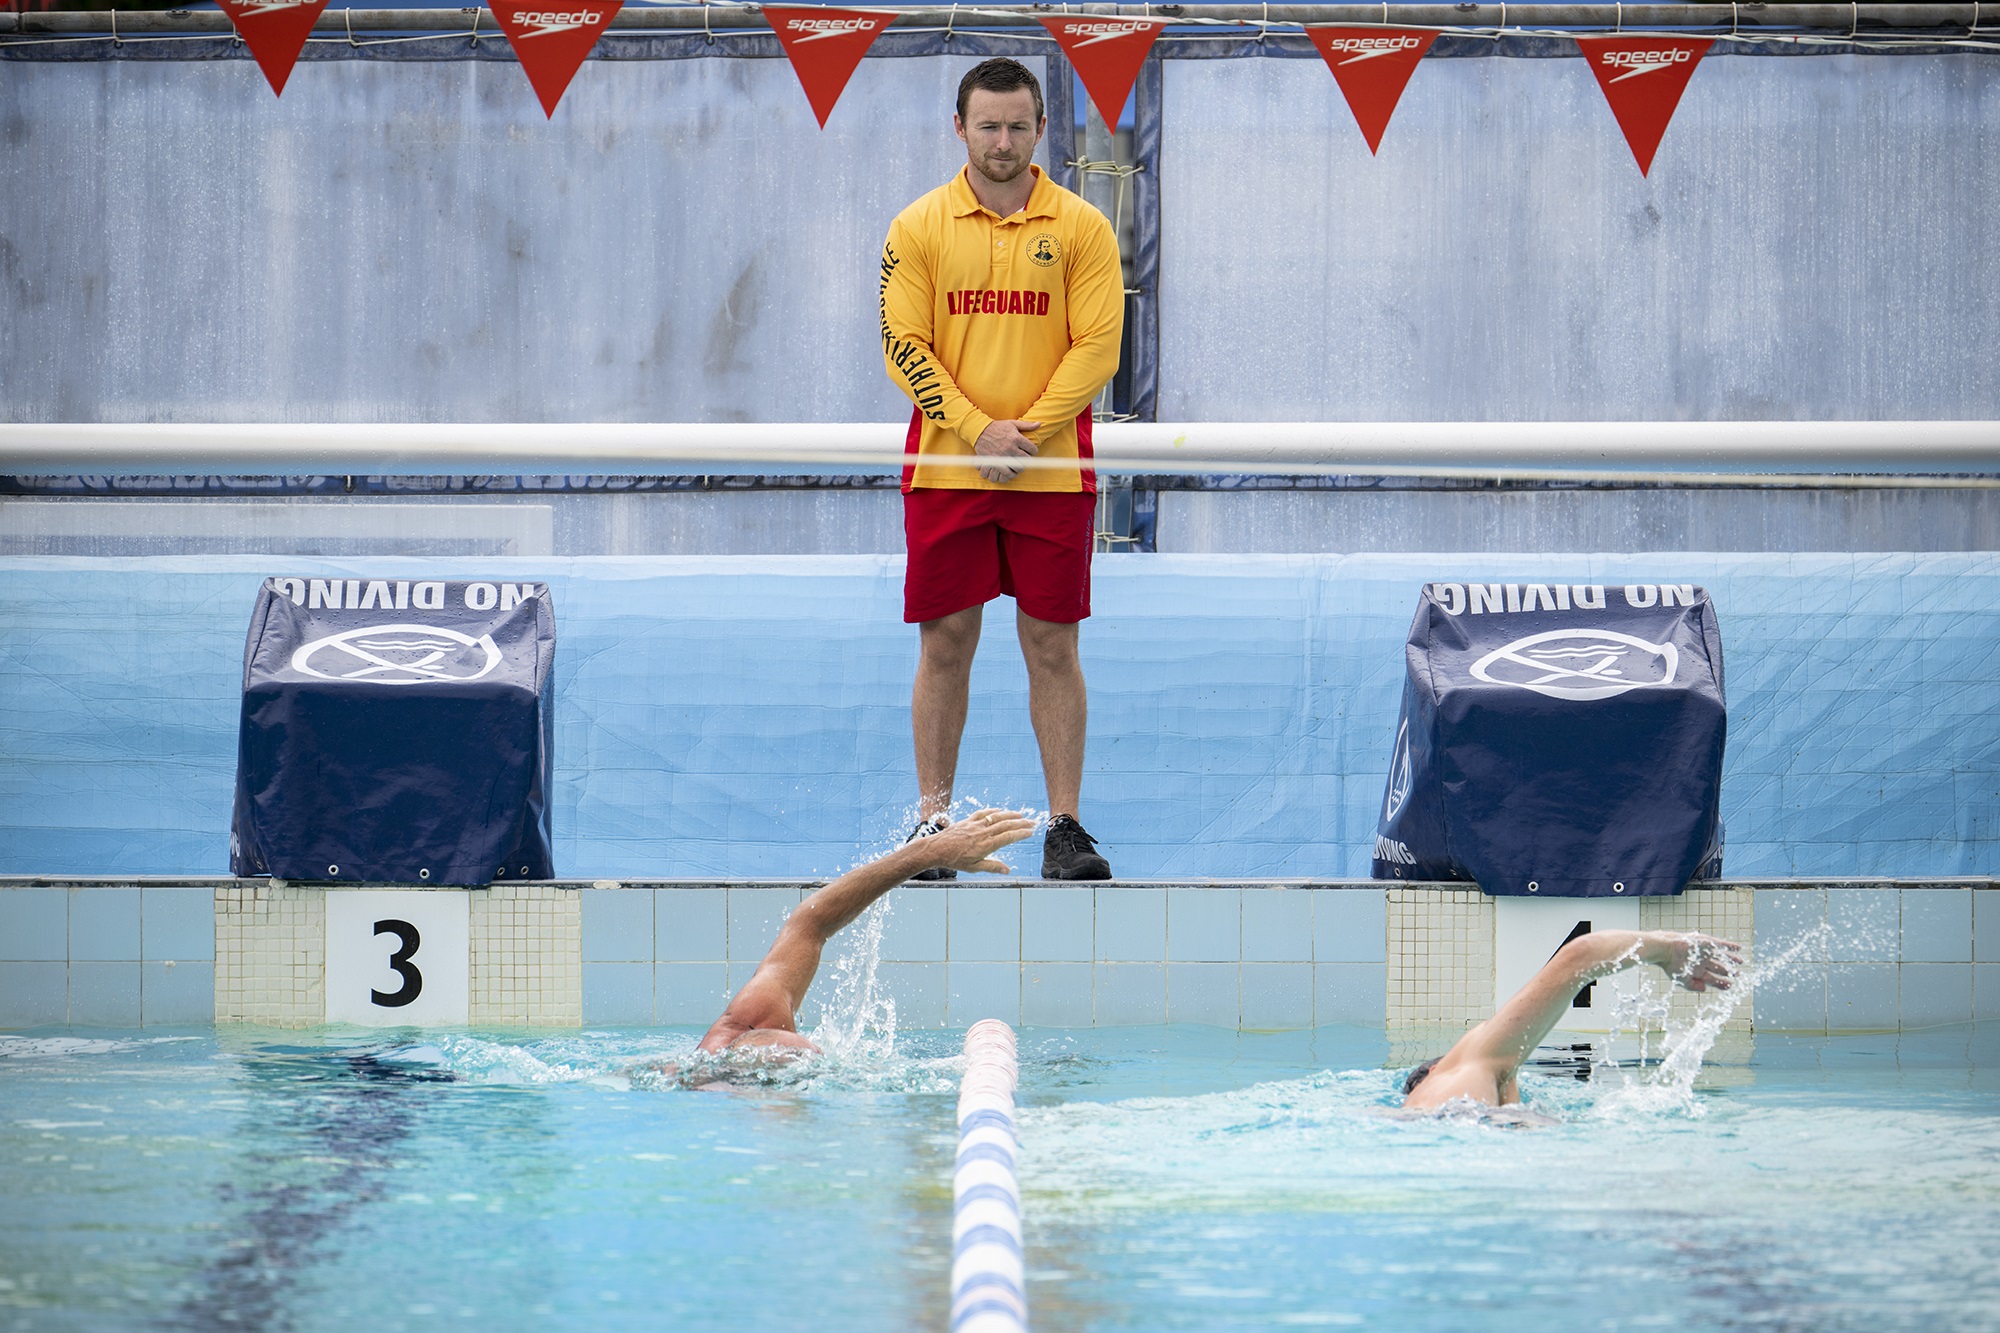 Lifeguard on duty at swimming pool with two swimmers